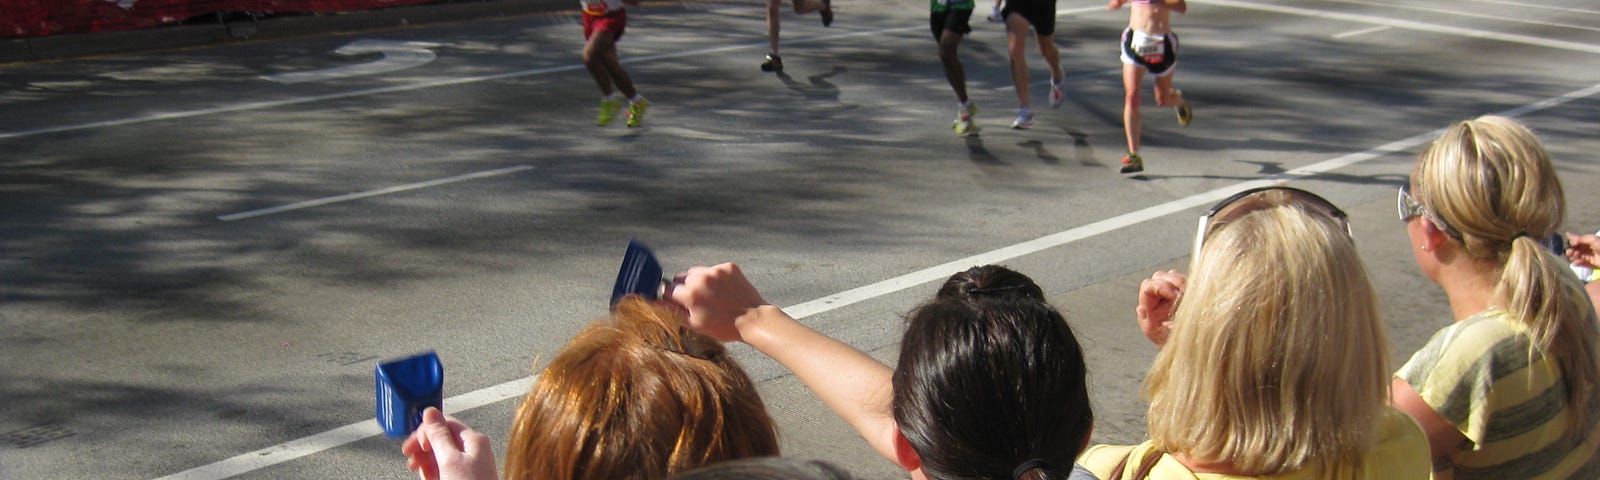 Runners entering the finish chute for a marathon